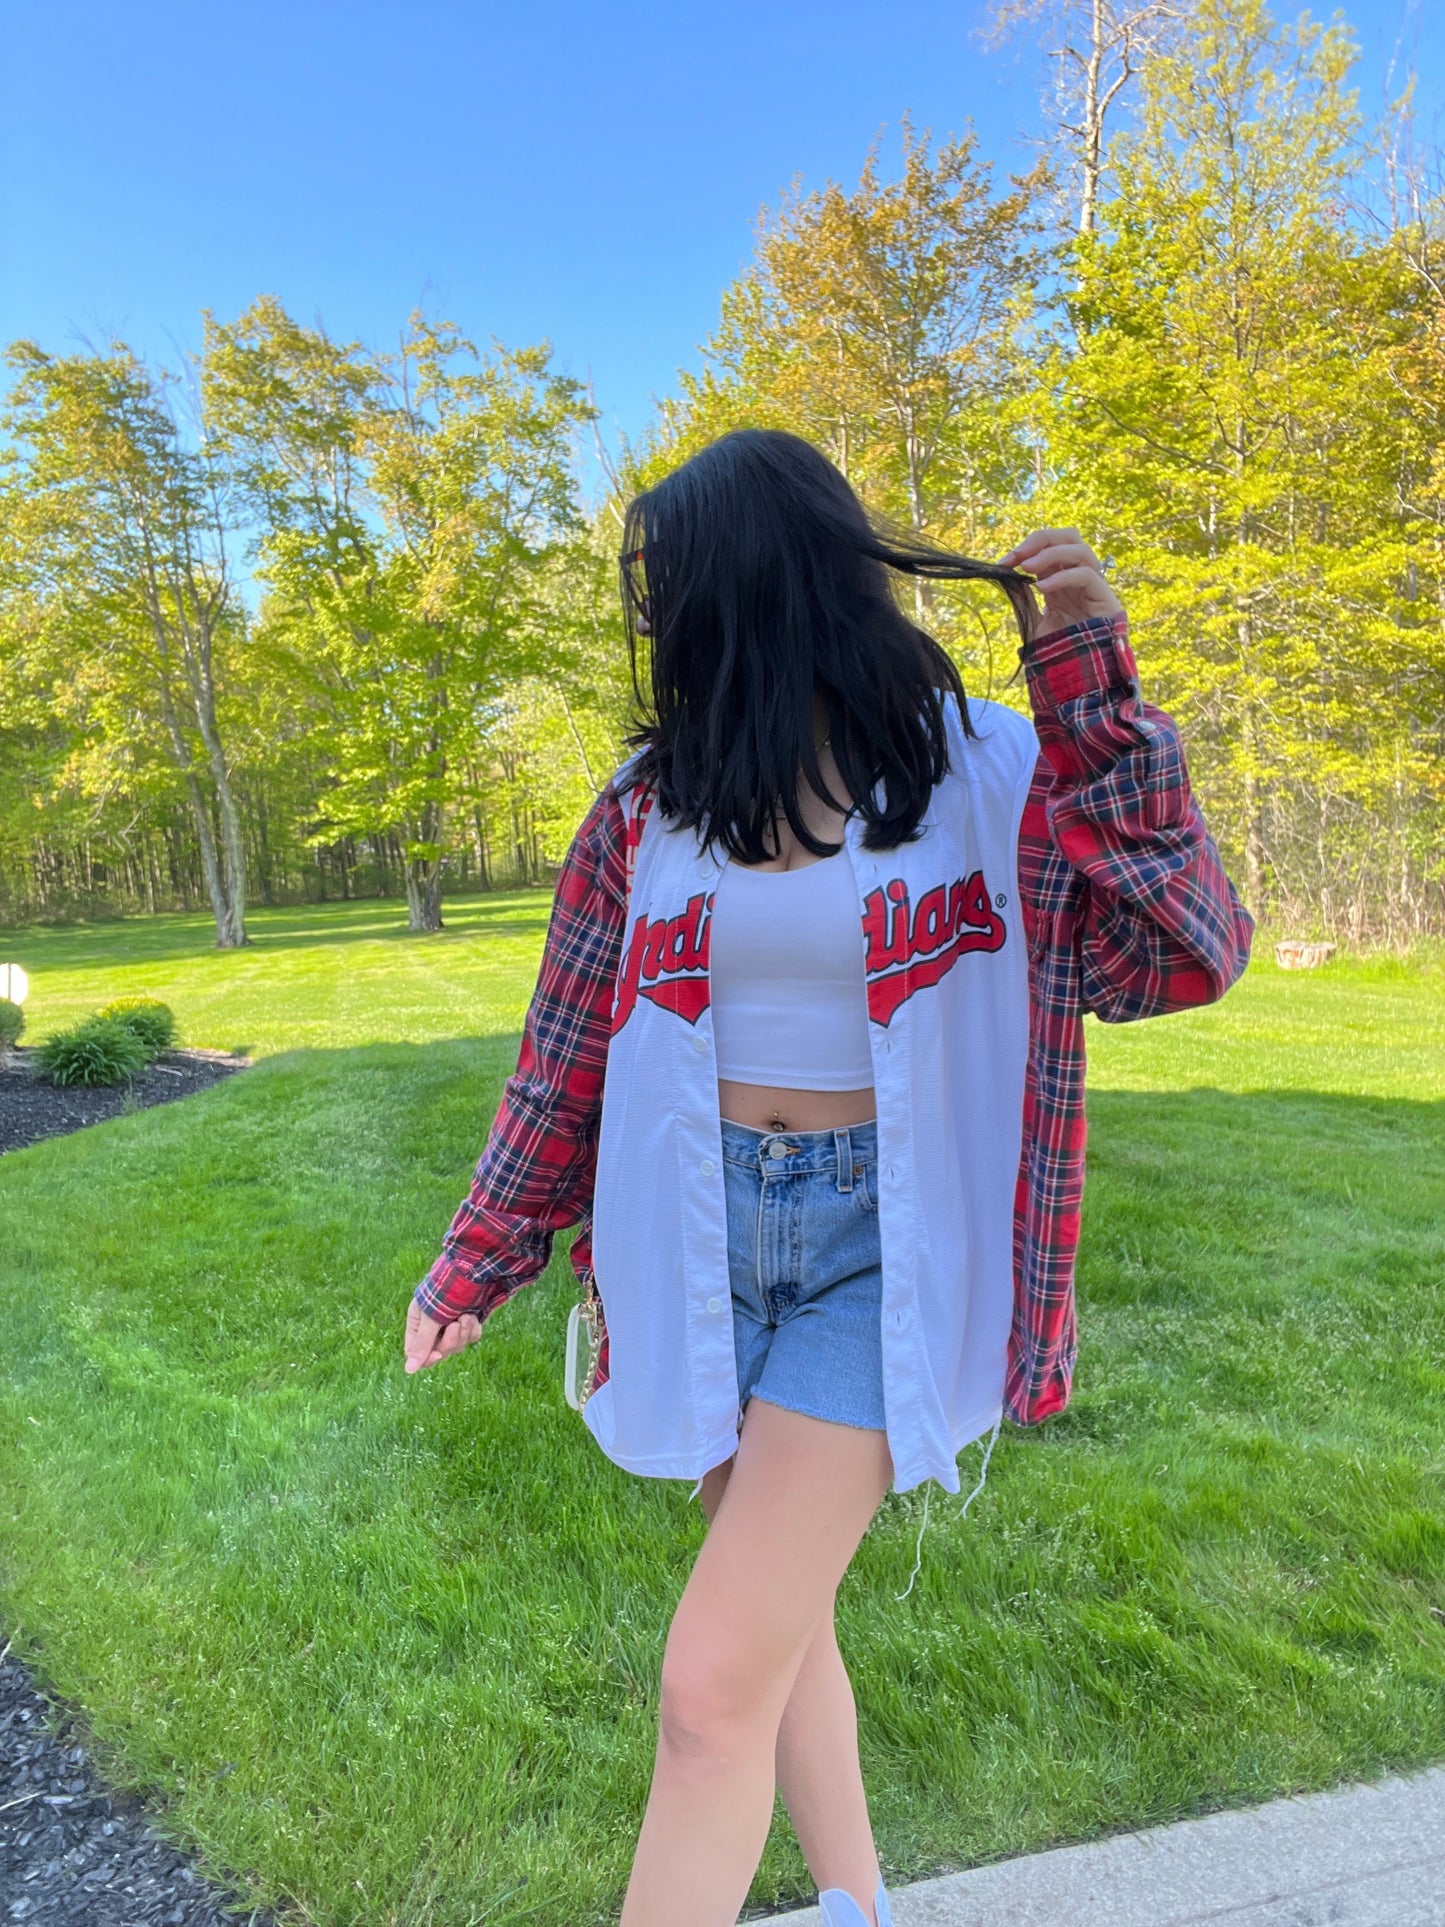 CLE BASEBALL JERSEY X FLANNEL